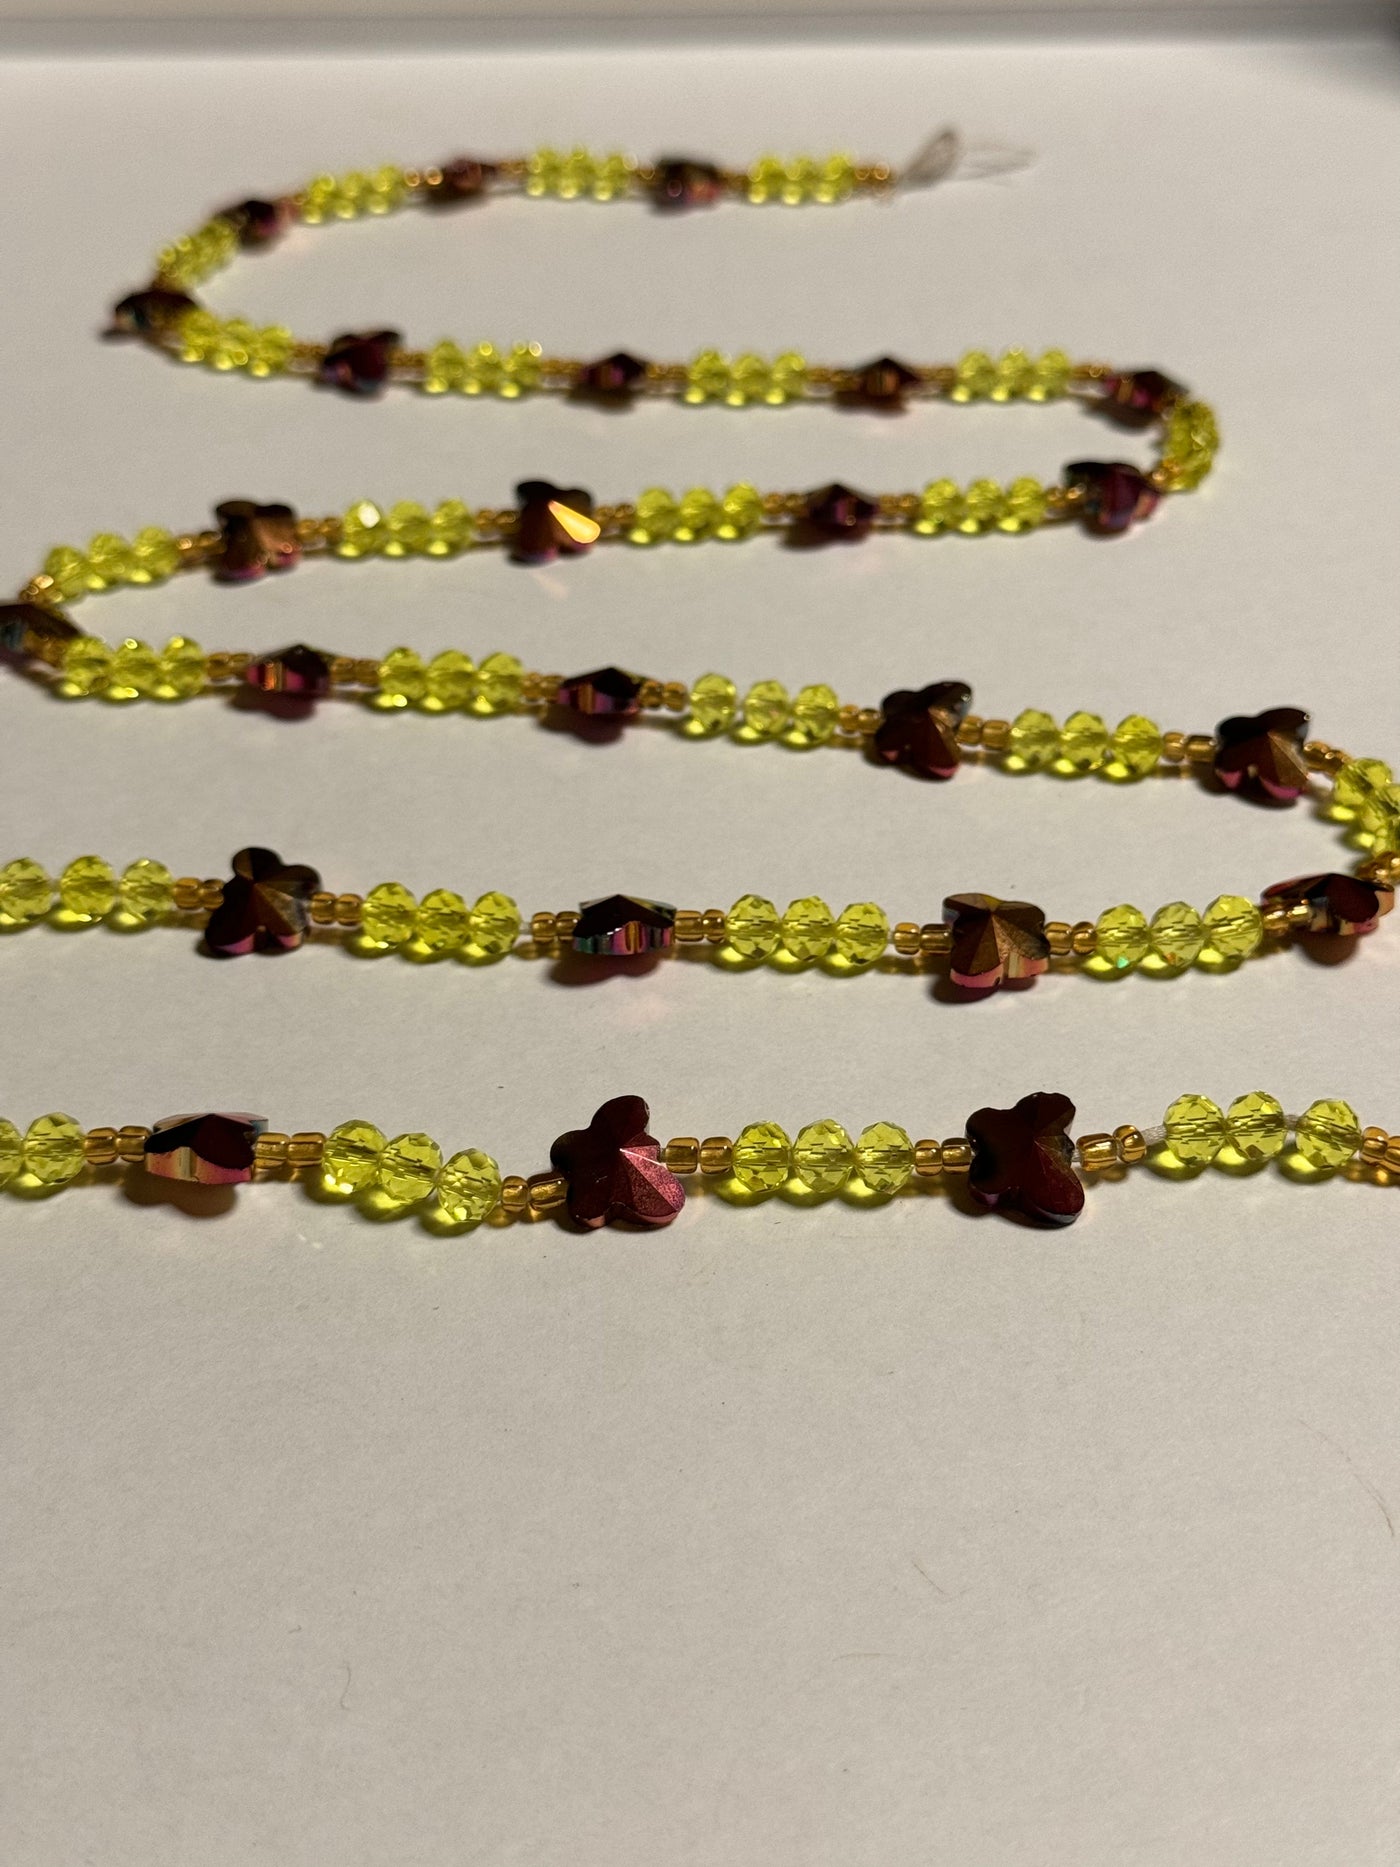 Femi (Love Me) Authentic Ghana Yellow Waistbeads 46 Inches (Wholesale)